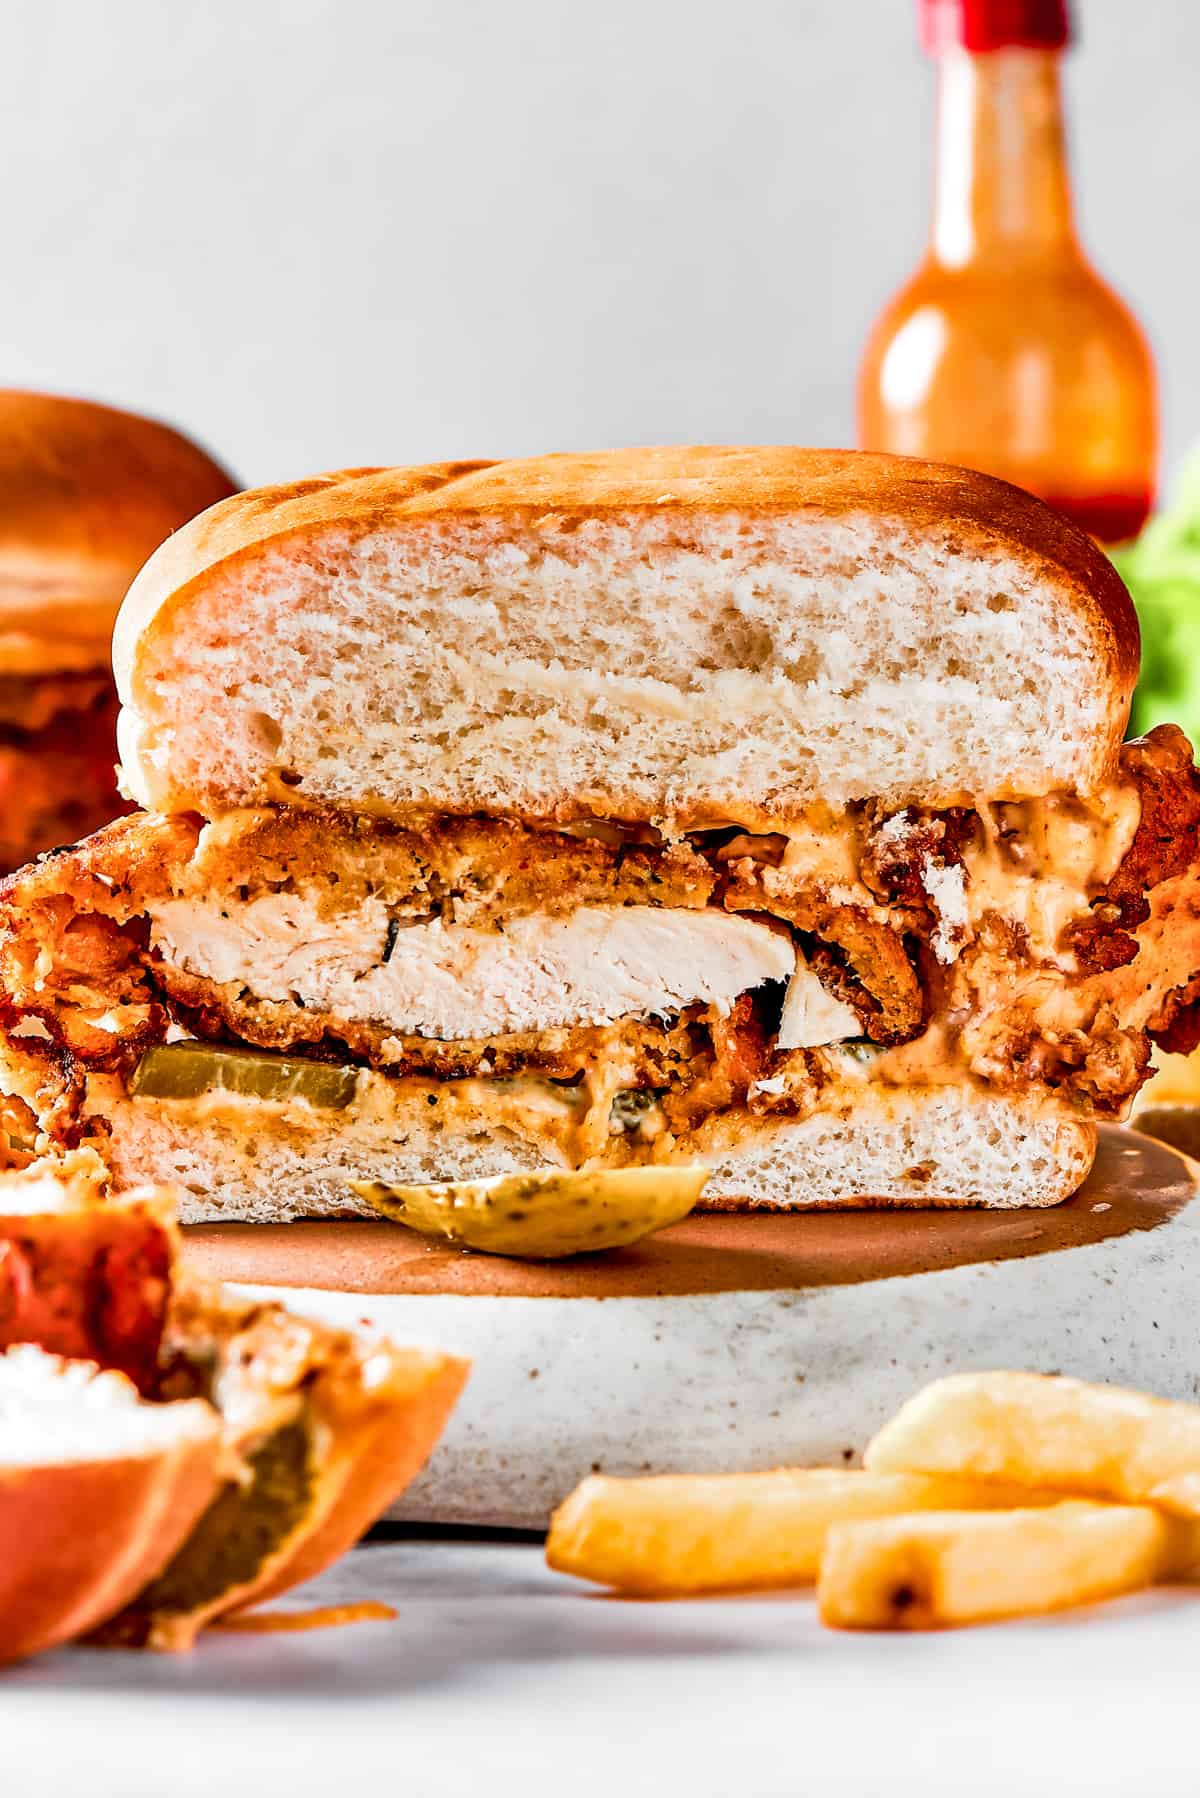 A homemade fried chicken sandwich cut in half to show the texture of the fried chicken and bun.